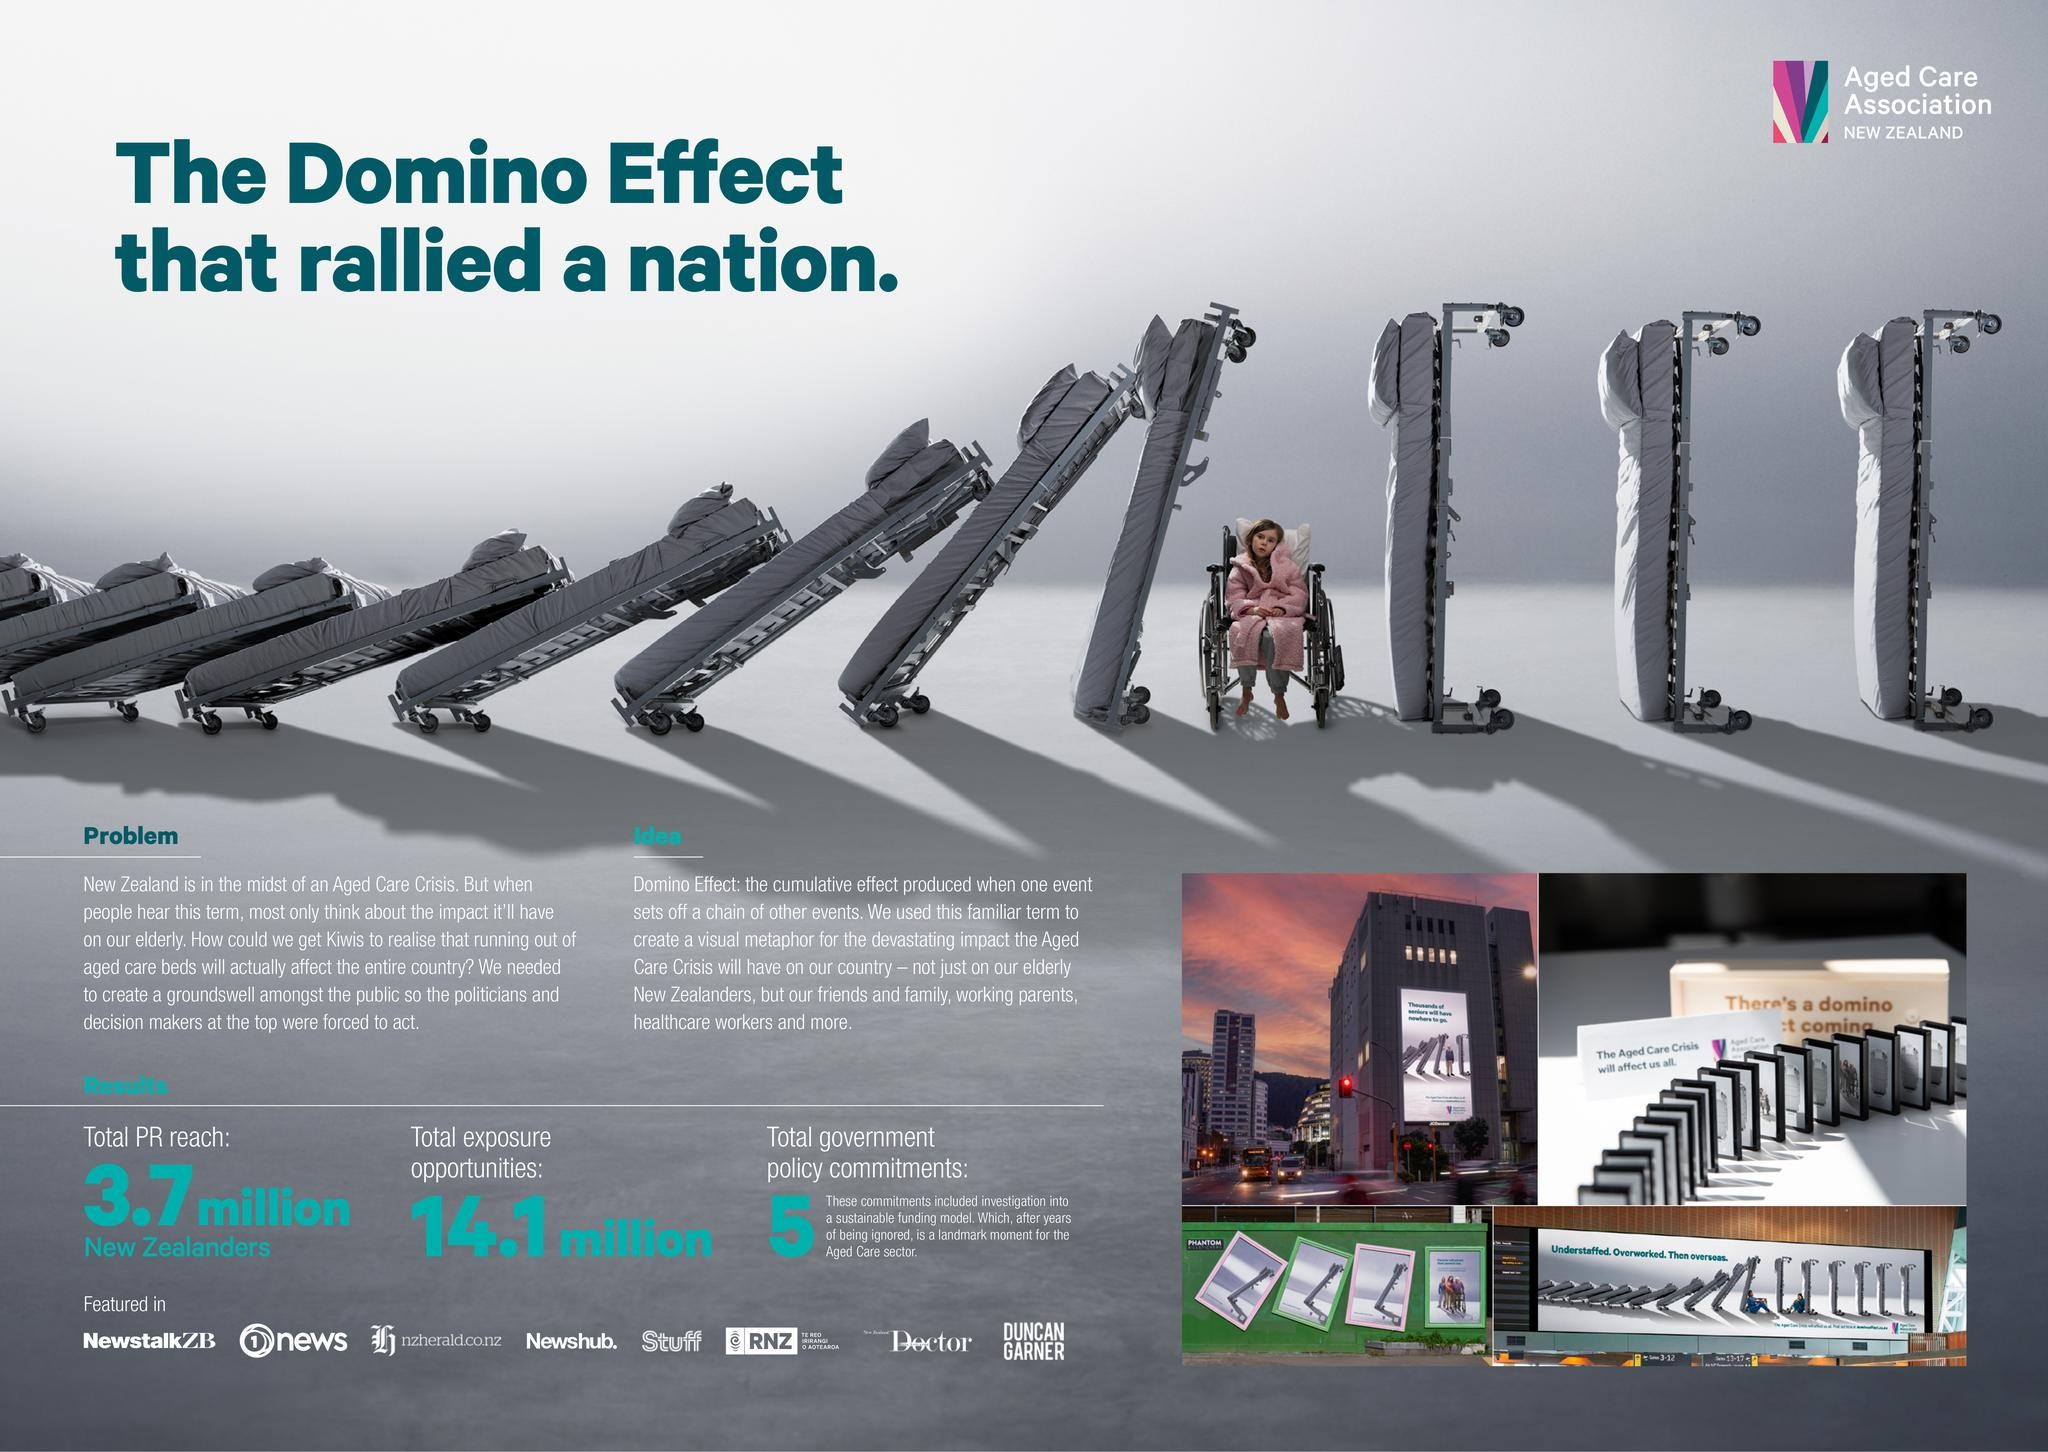 THE DOMINO EFFECT